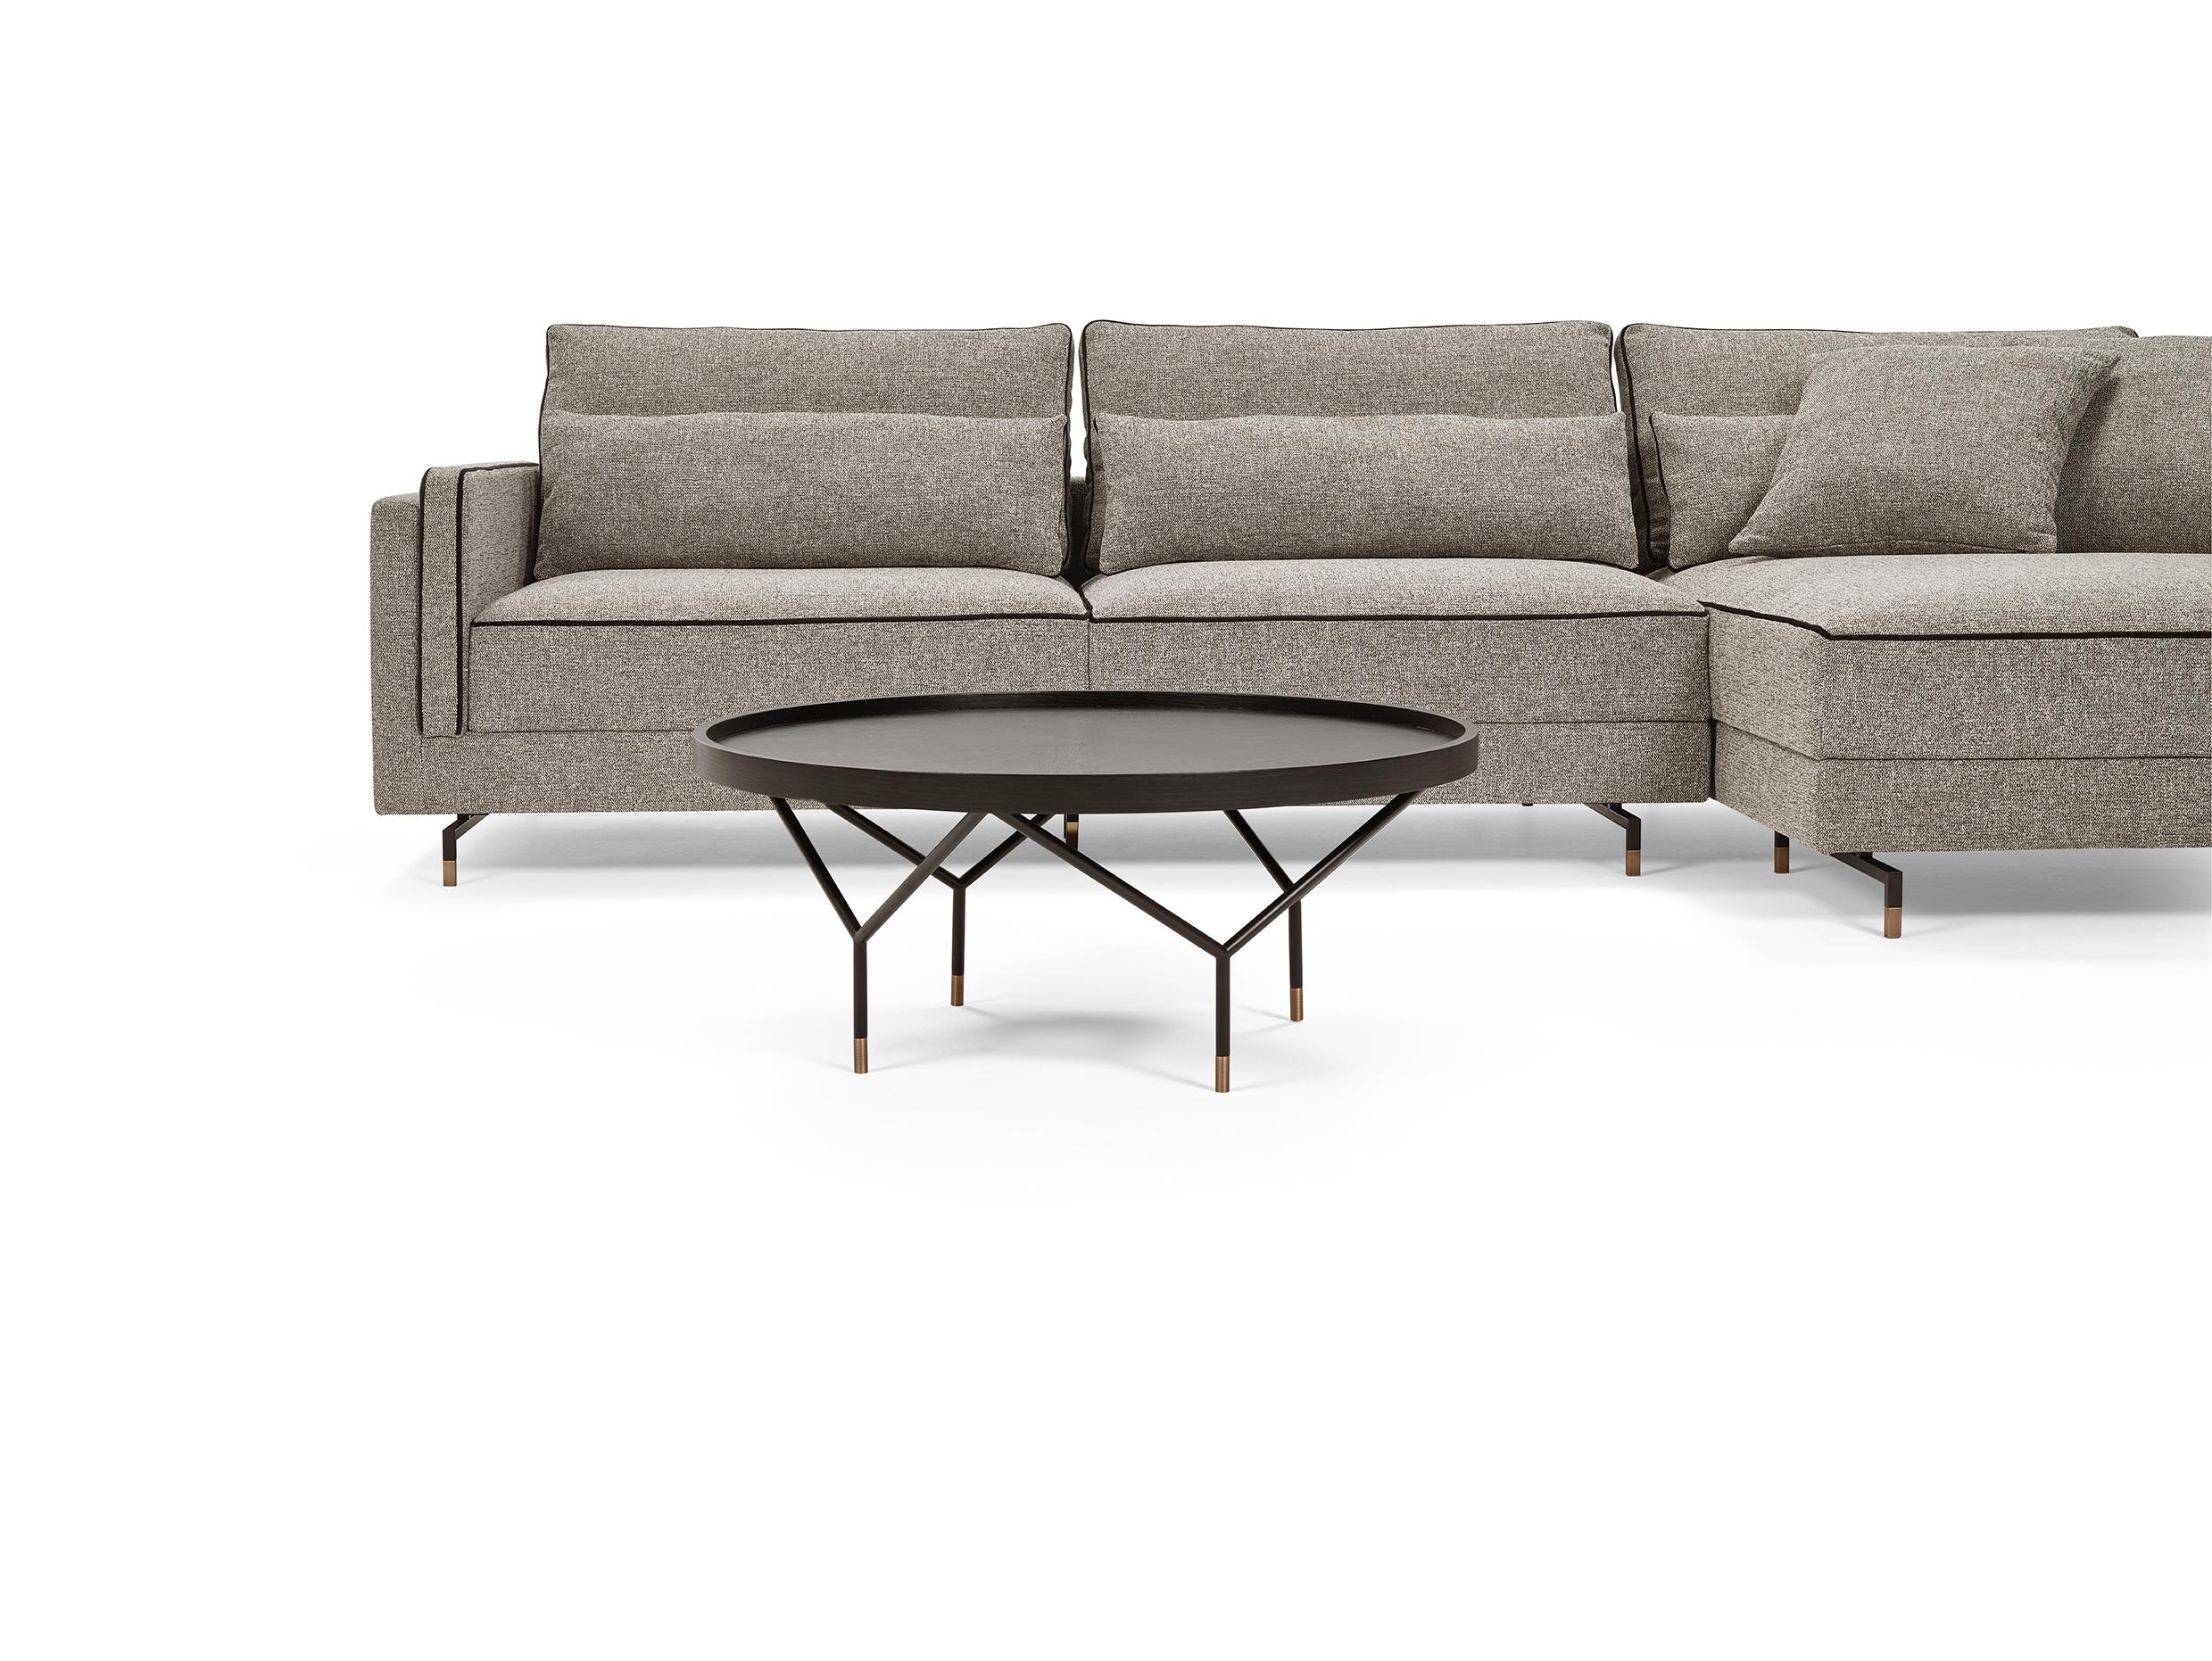 The SINATRA modular seating system is the result of a search for elegance, comfort and versatility combined with each other. The contemporary style design of the Sinatra sofa is characterized by a seamless contrast piping detail that defines its